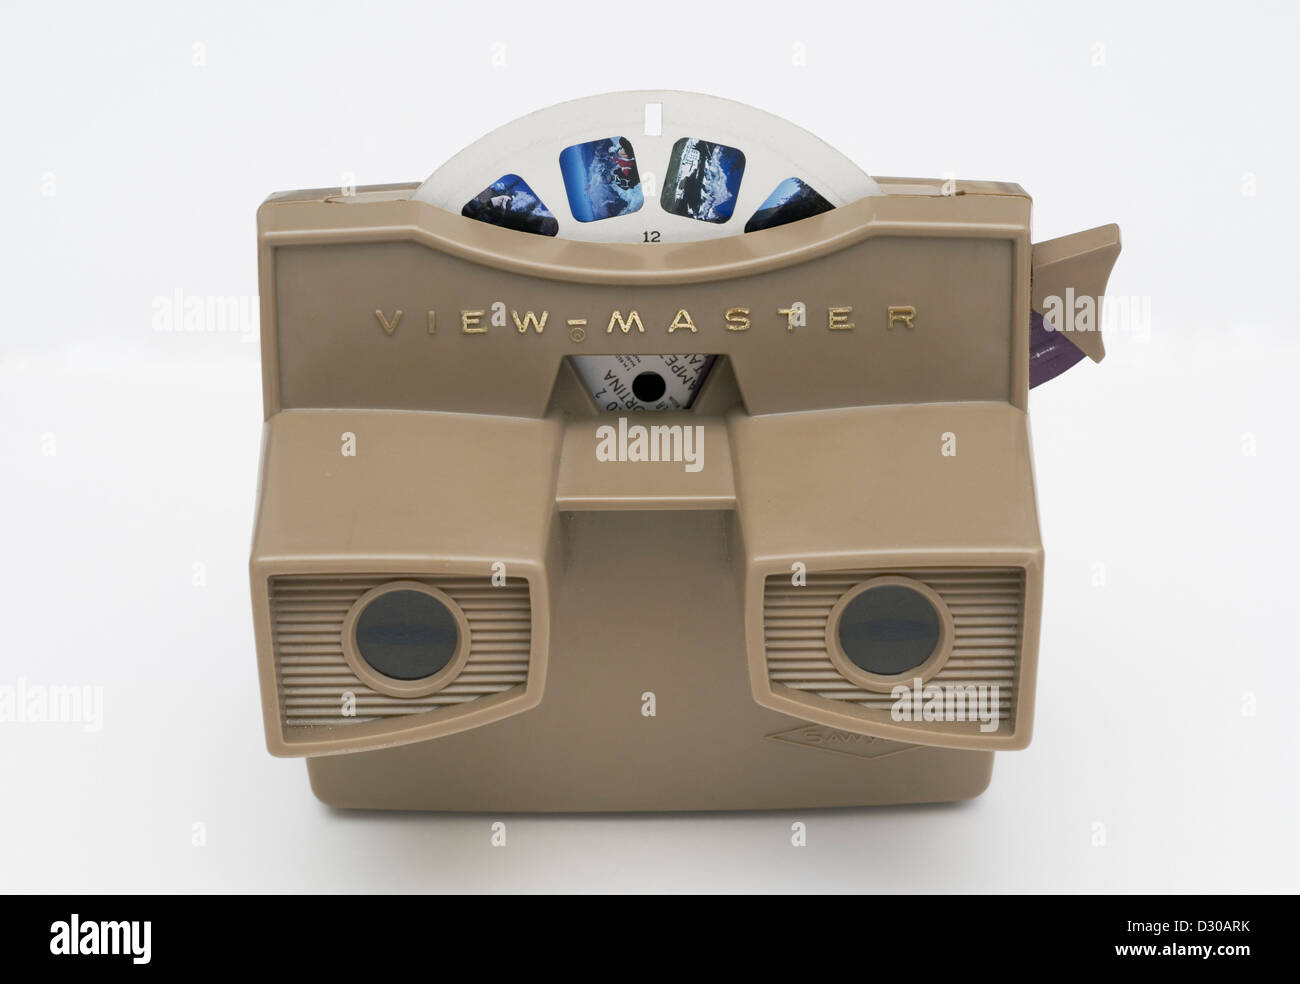 VIEW-MASTER with reel Stock Photo